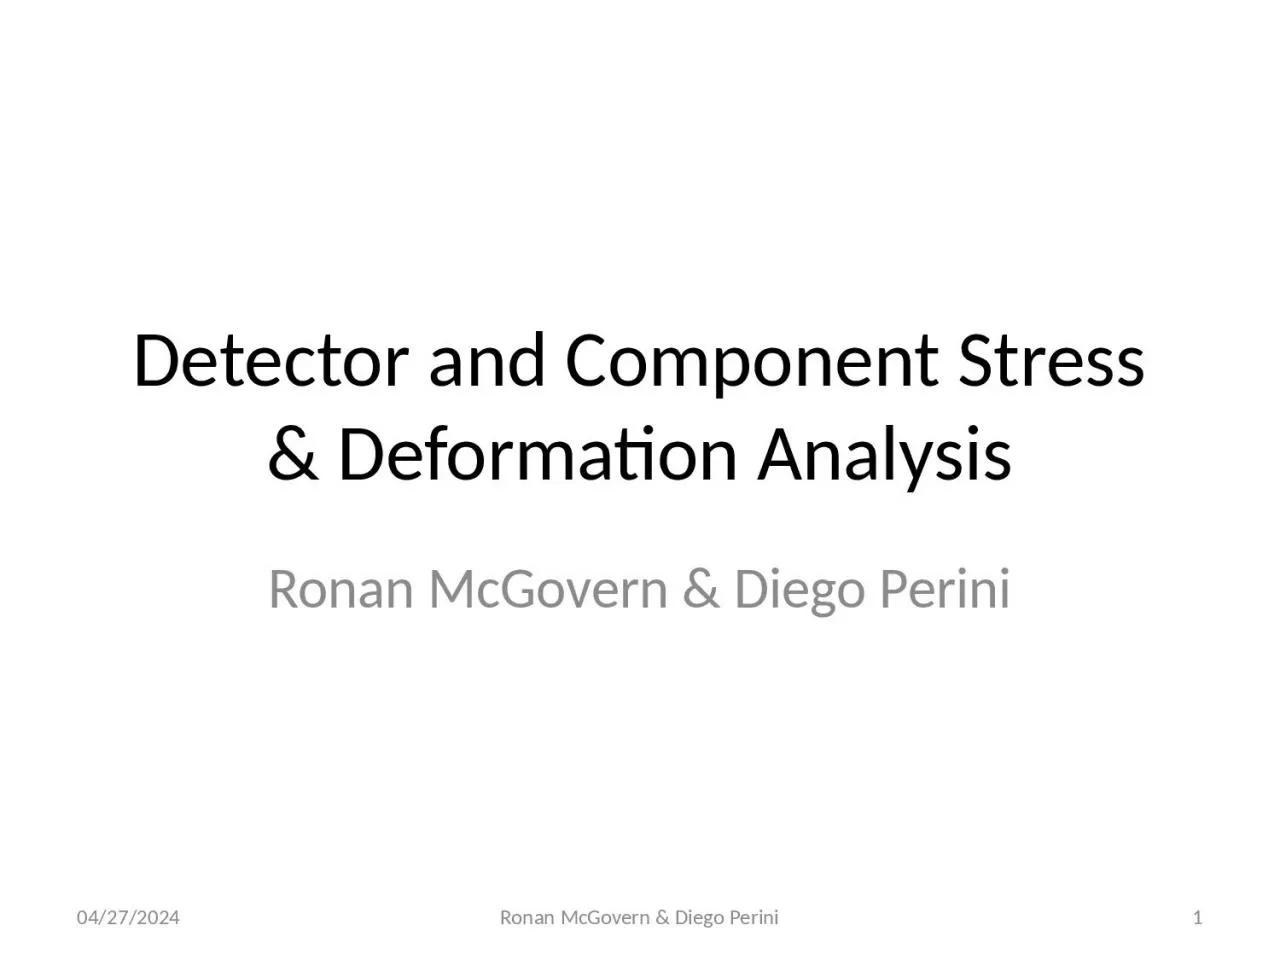 Detector and Component Stress & Deformation Analysis